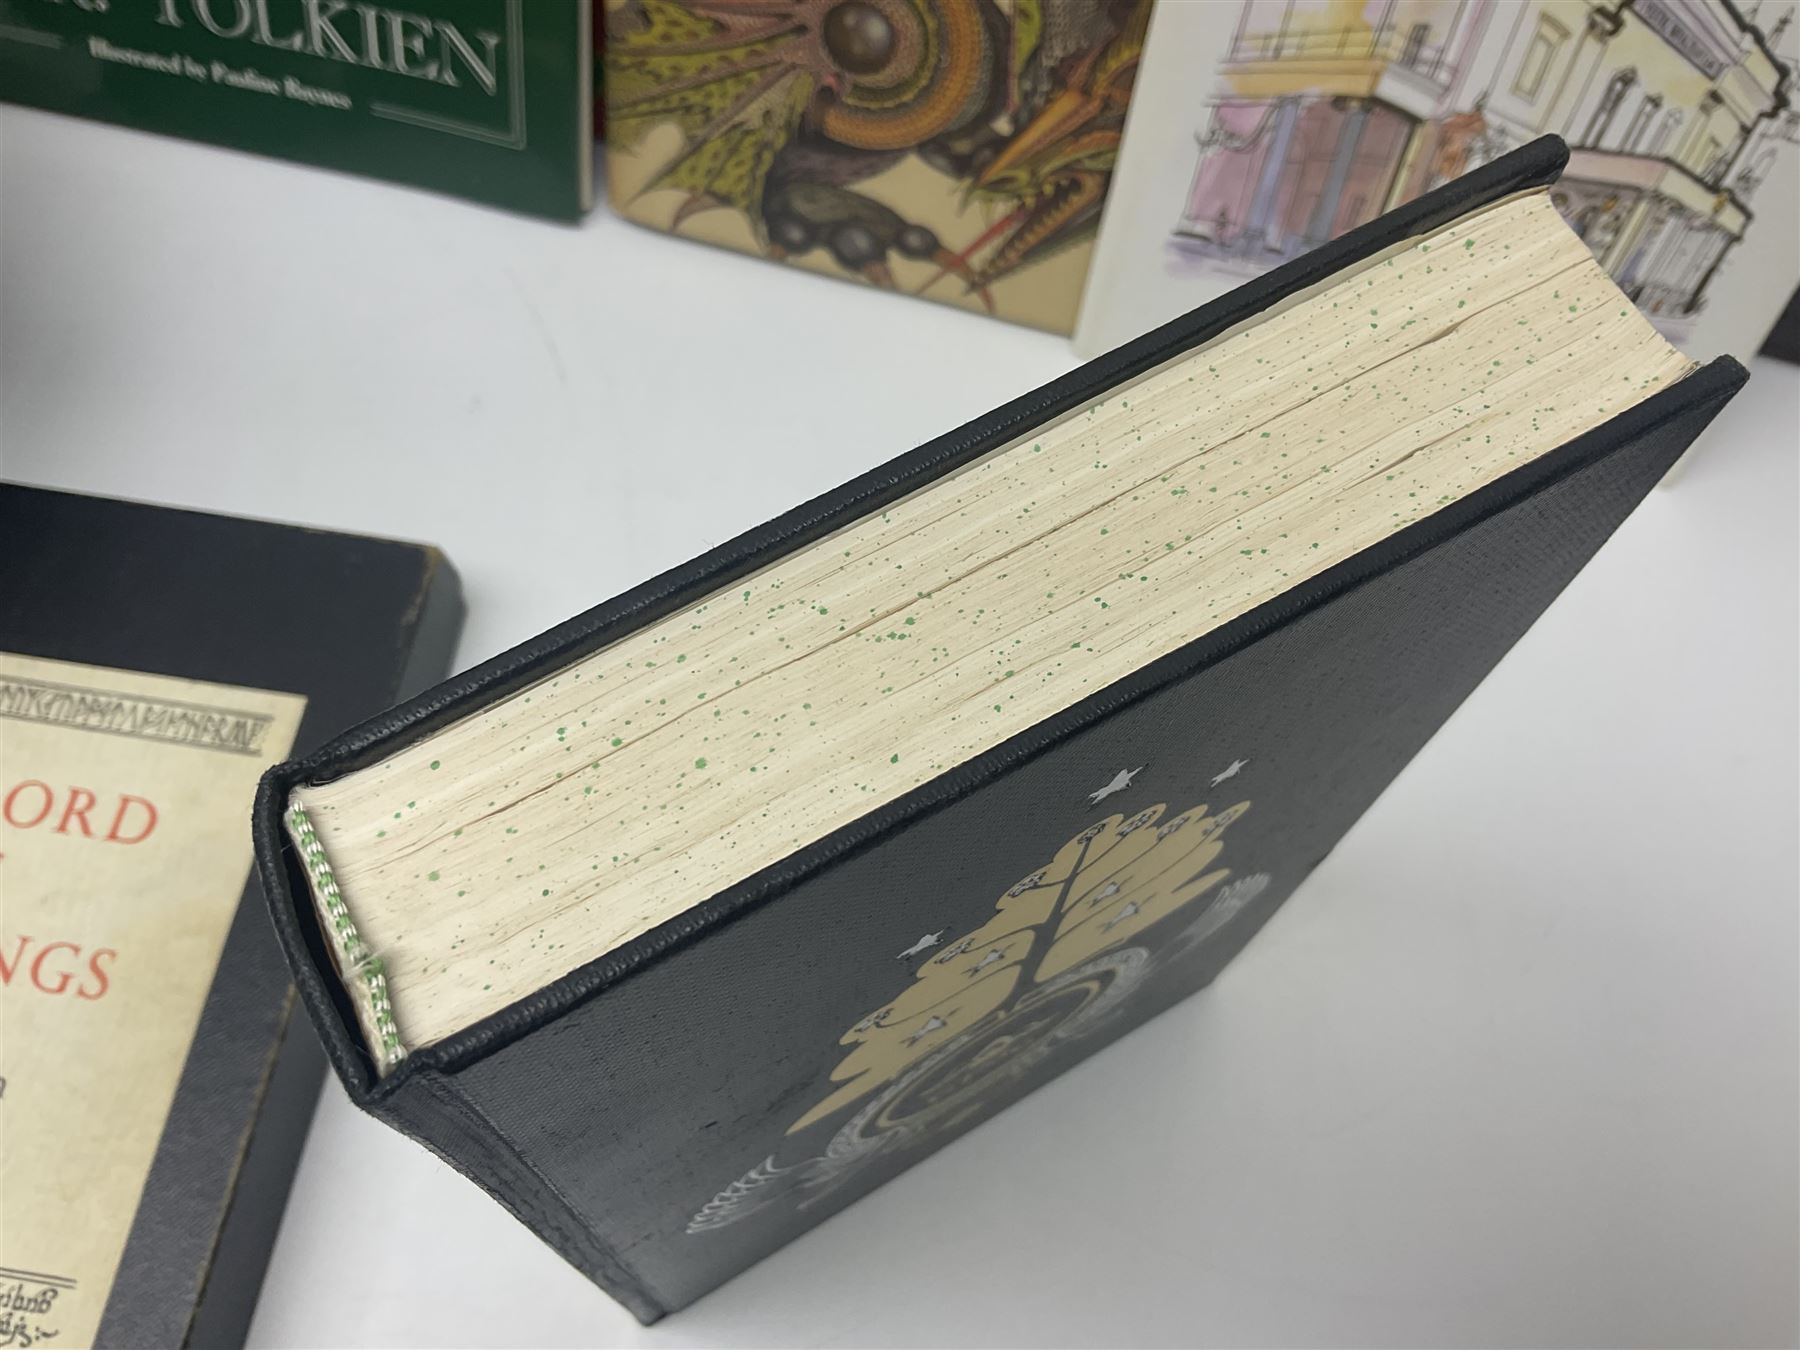 J.R.R. Tolkien 'The Lord of the Rings' Deluxe Edition seventh impression and 'Poems and Stories' pub - Image 8 of 23